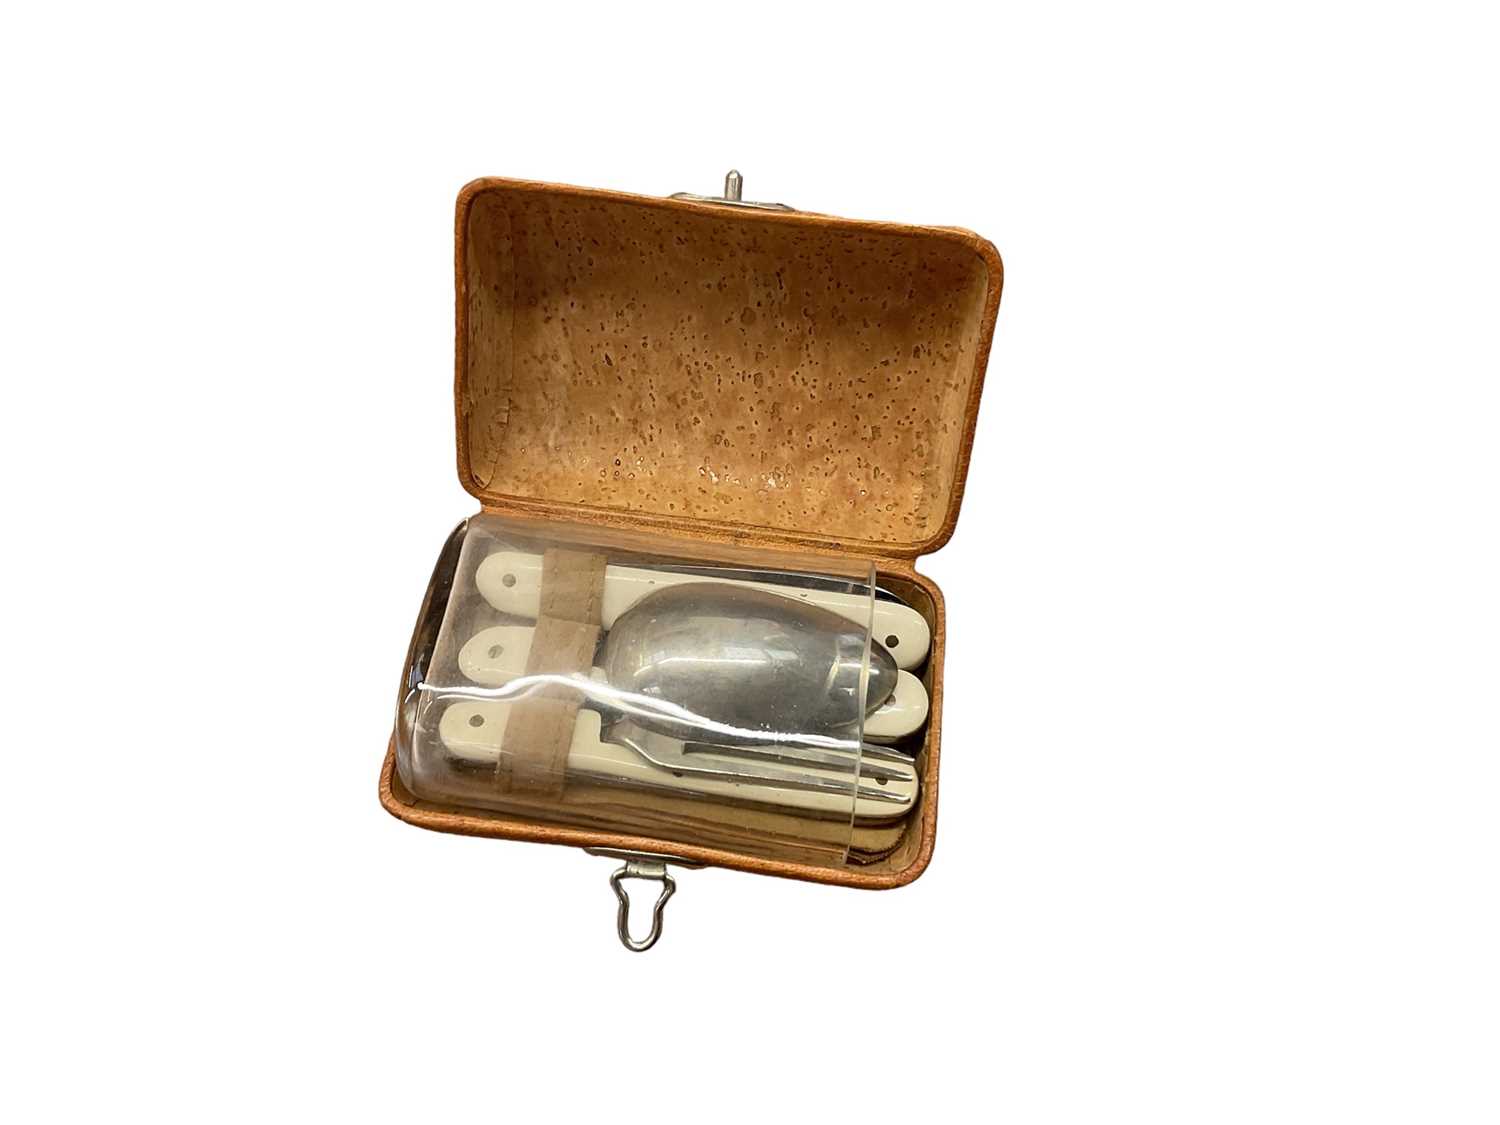 Unusual late 19th century/early 20th century picnic/travel cutlery with glass tumbler in original ca - Image 2 of 2